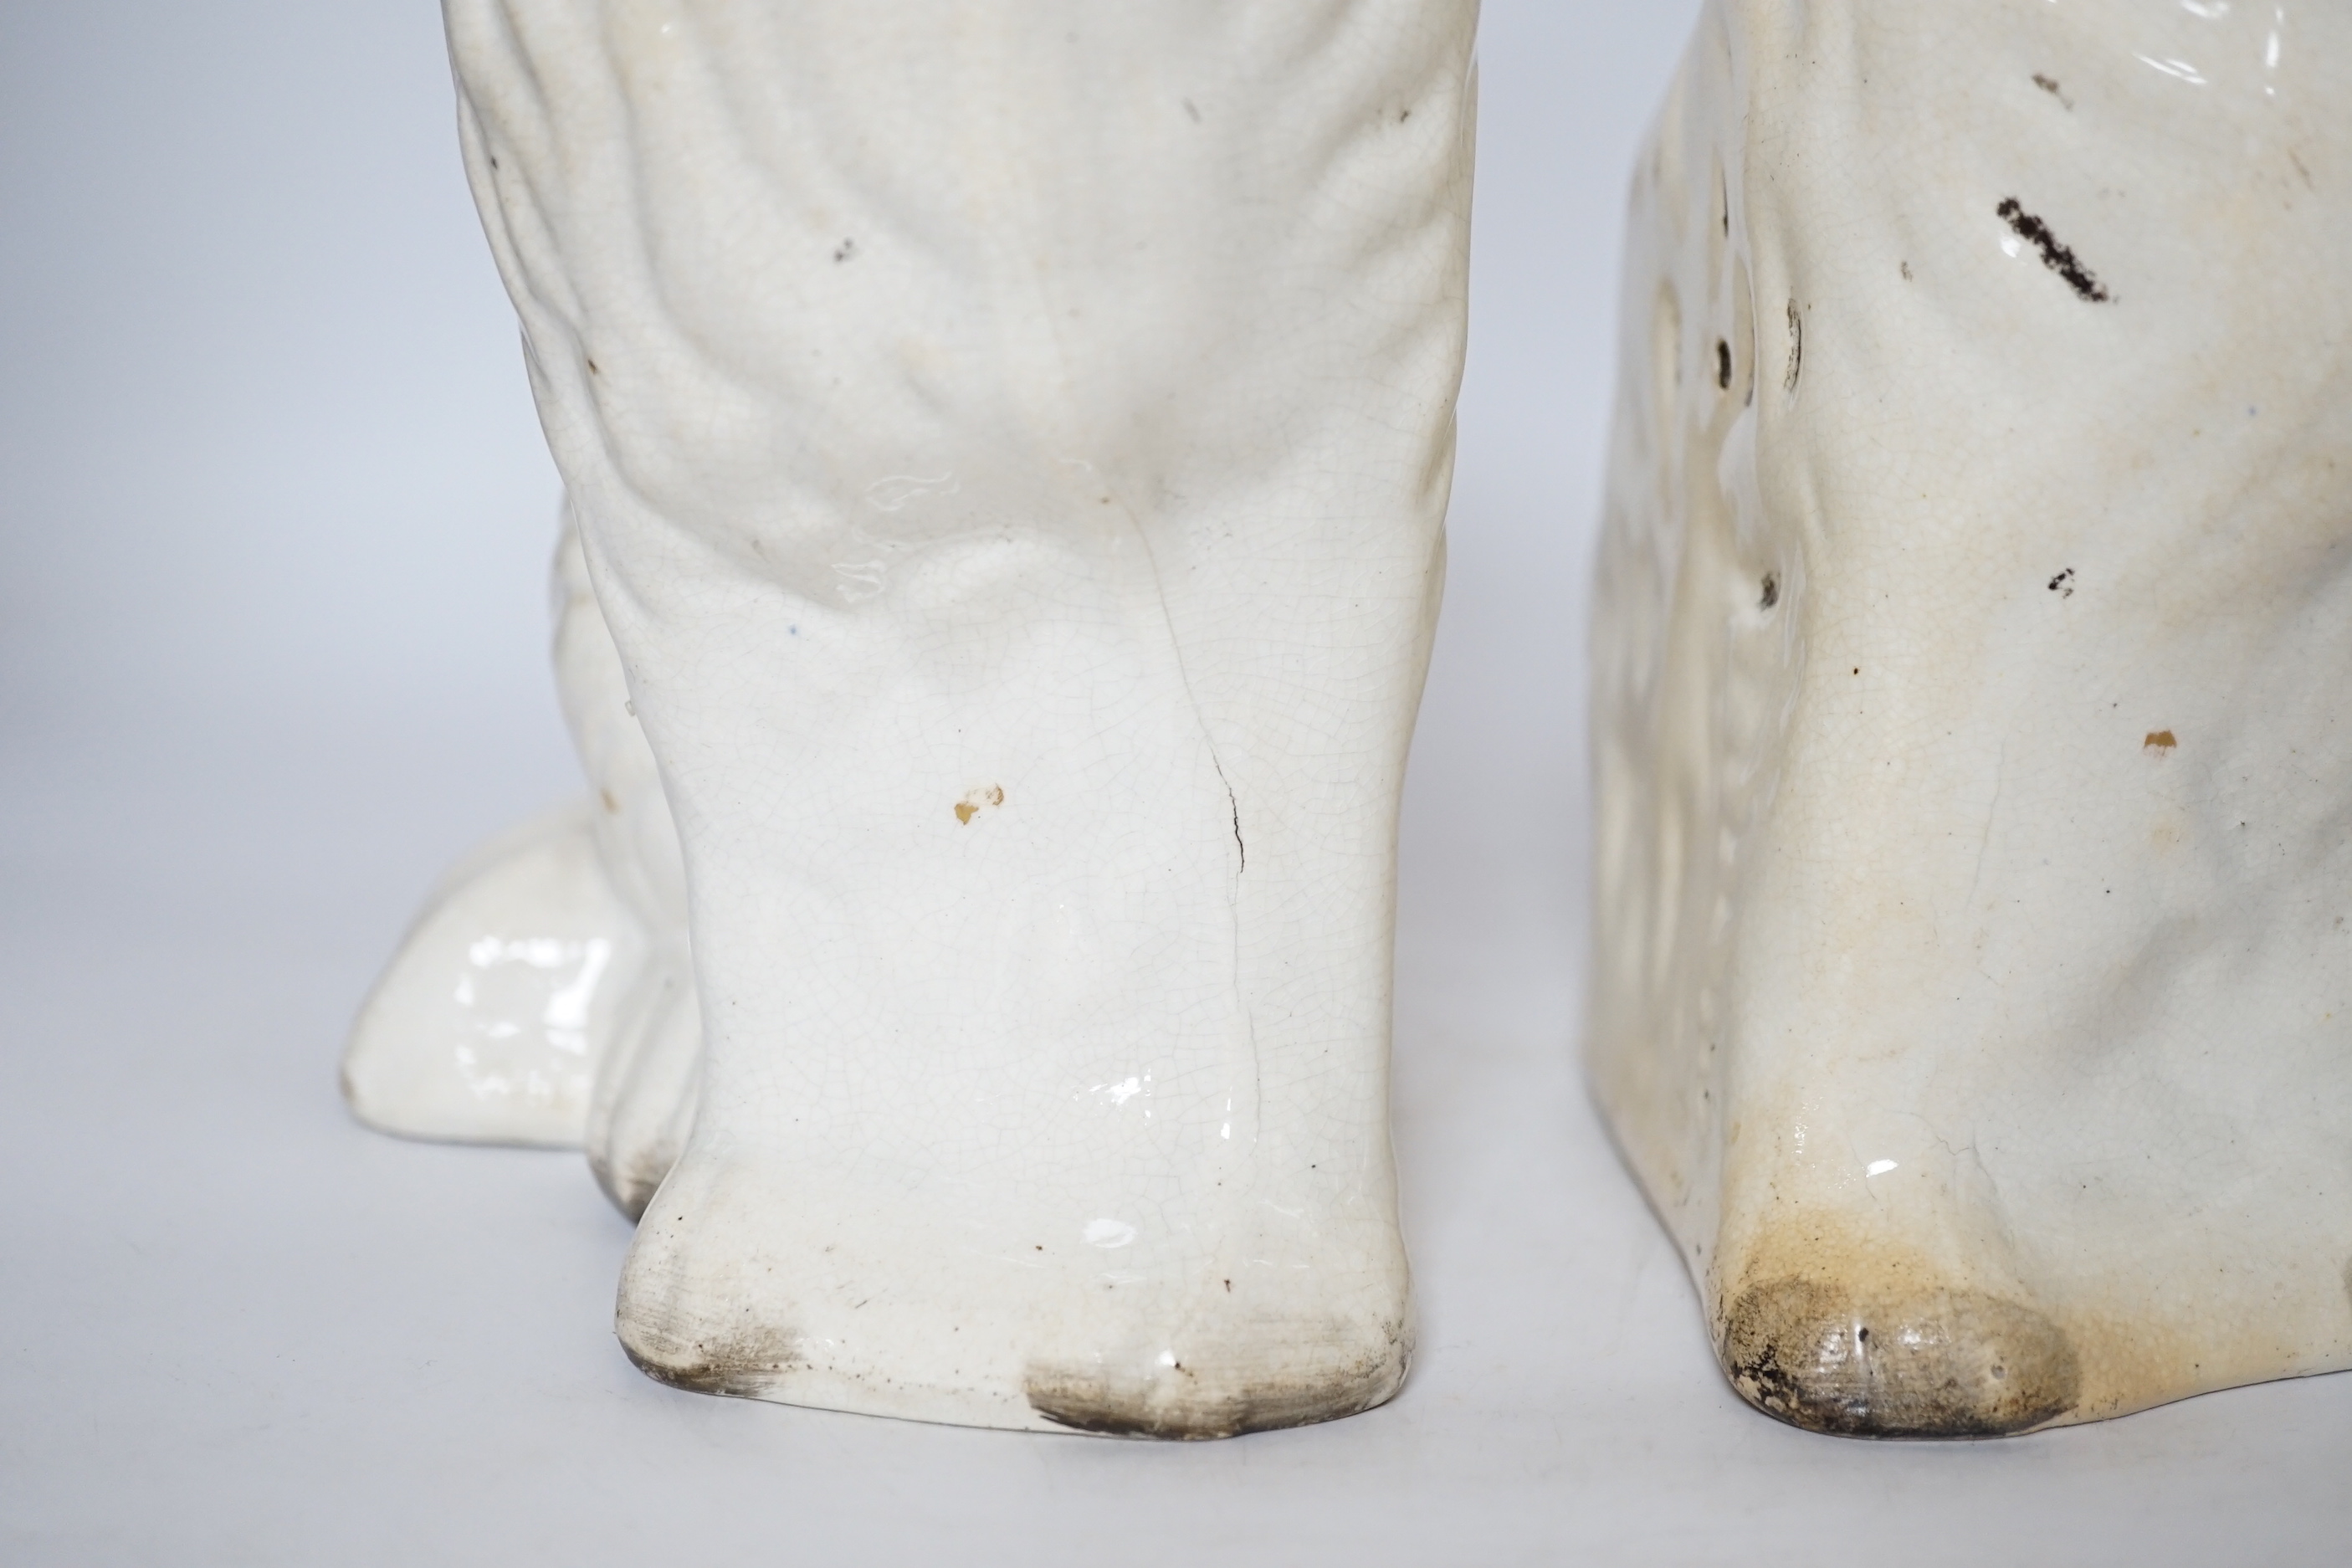 A pair of Staffordshire pottery dogs, 25cm high